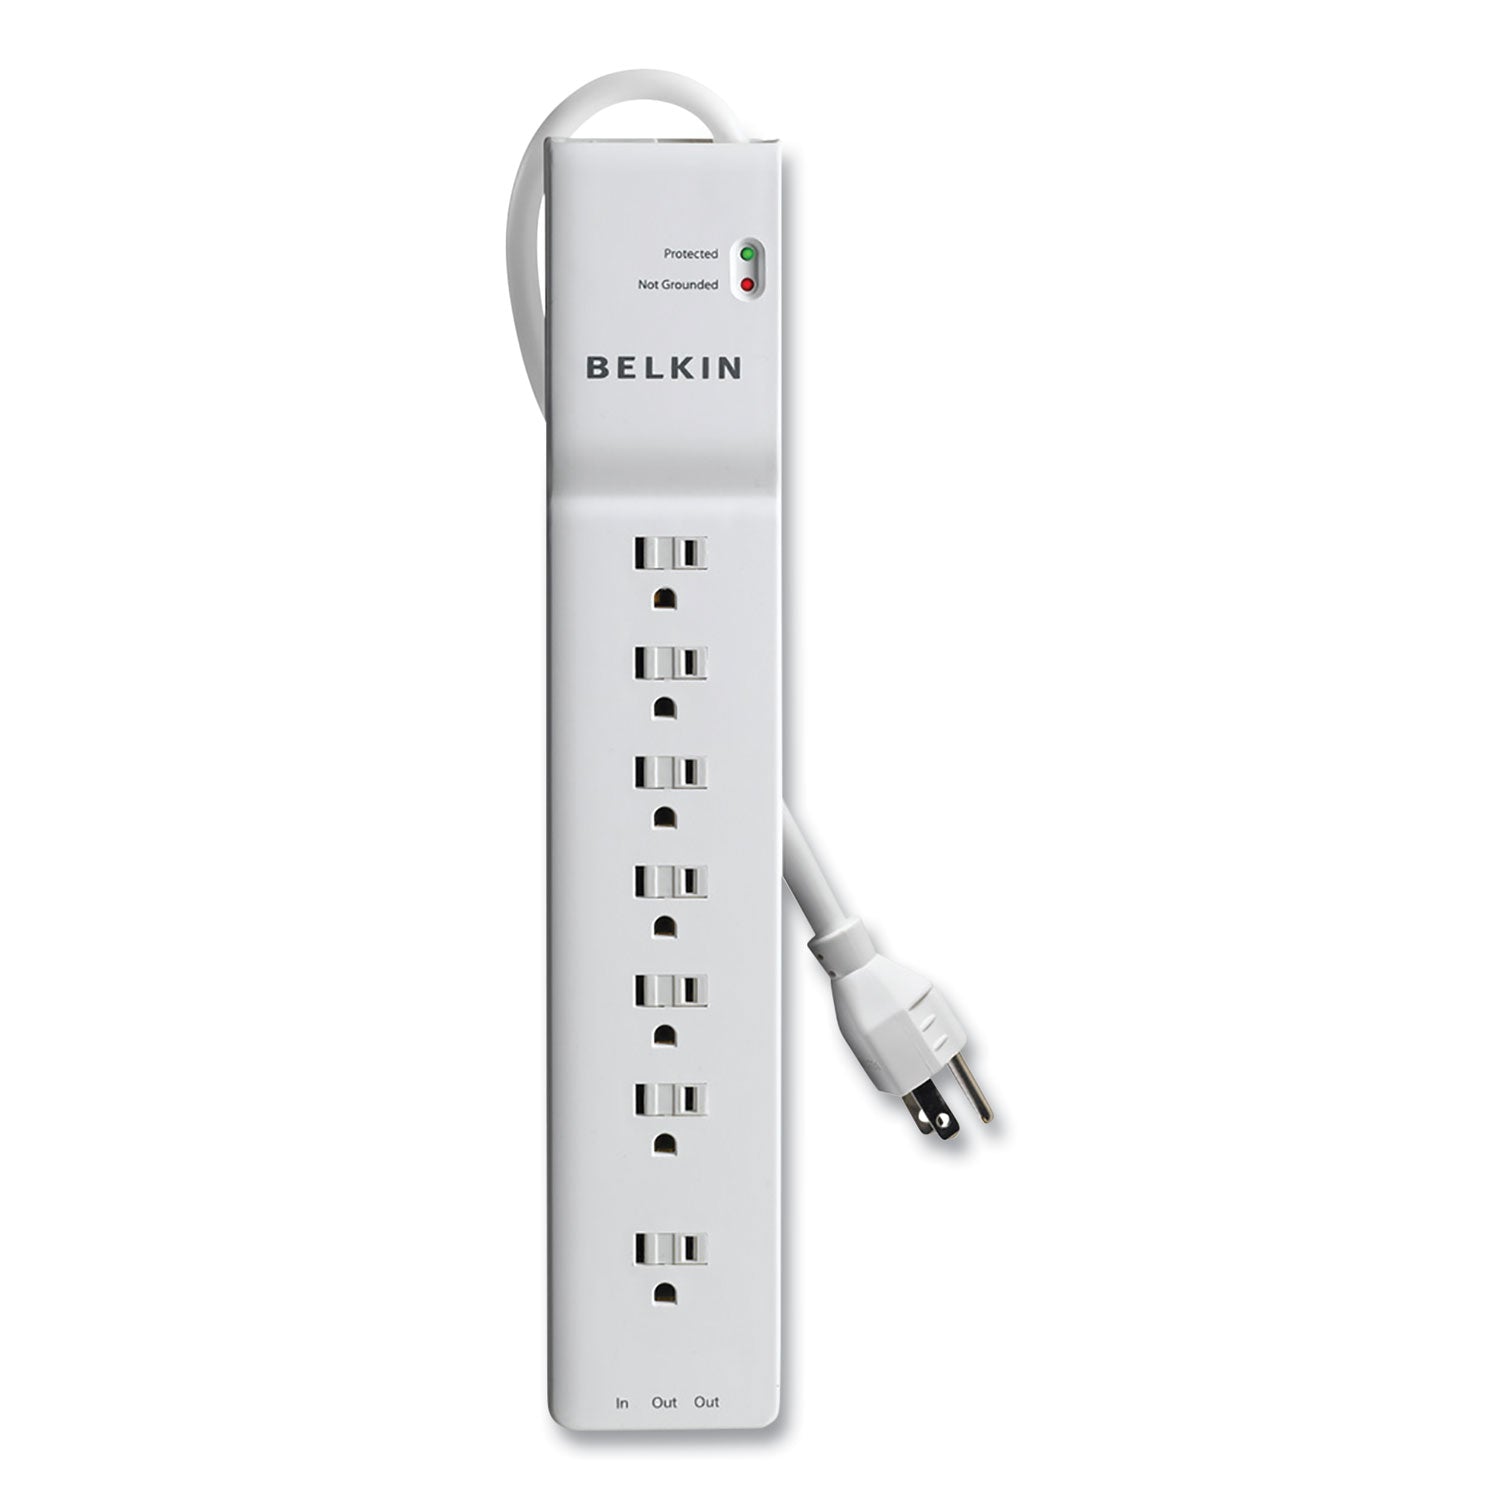 Home/Office Surge Protector, 7 AC Outlets, 6 ft Cord, 2,320 J, White - 